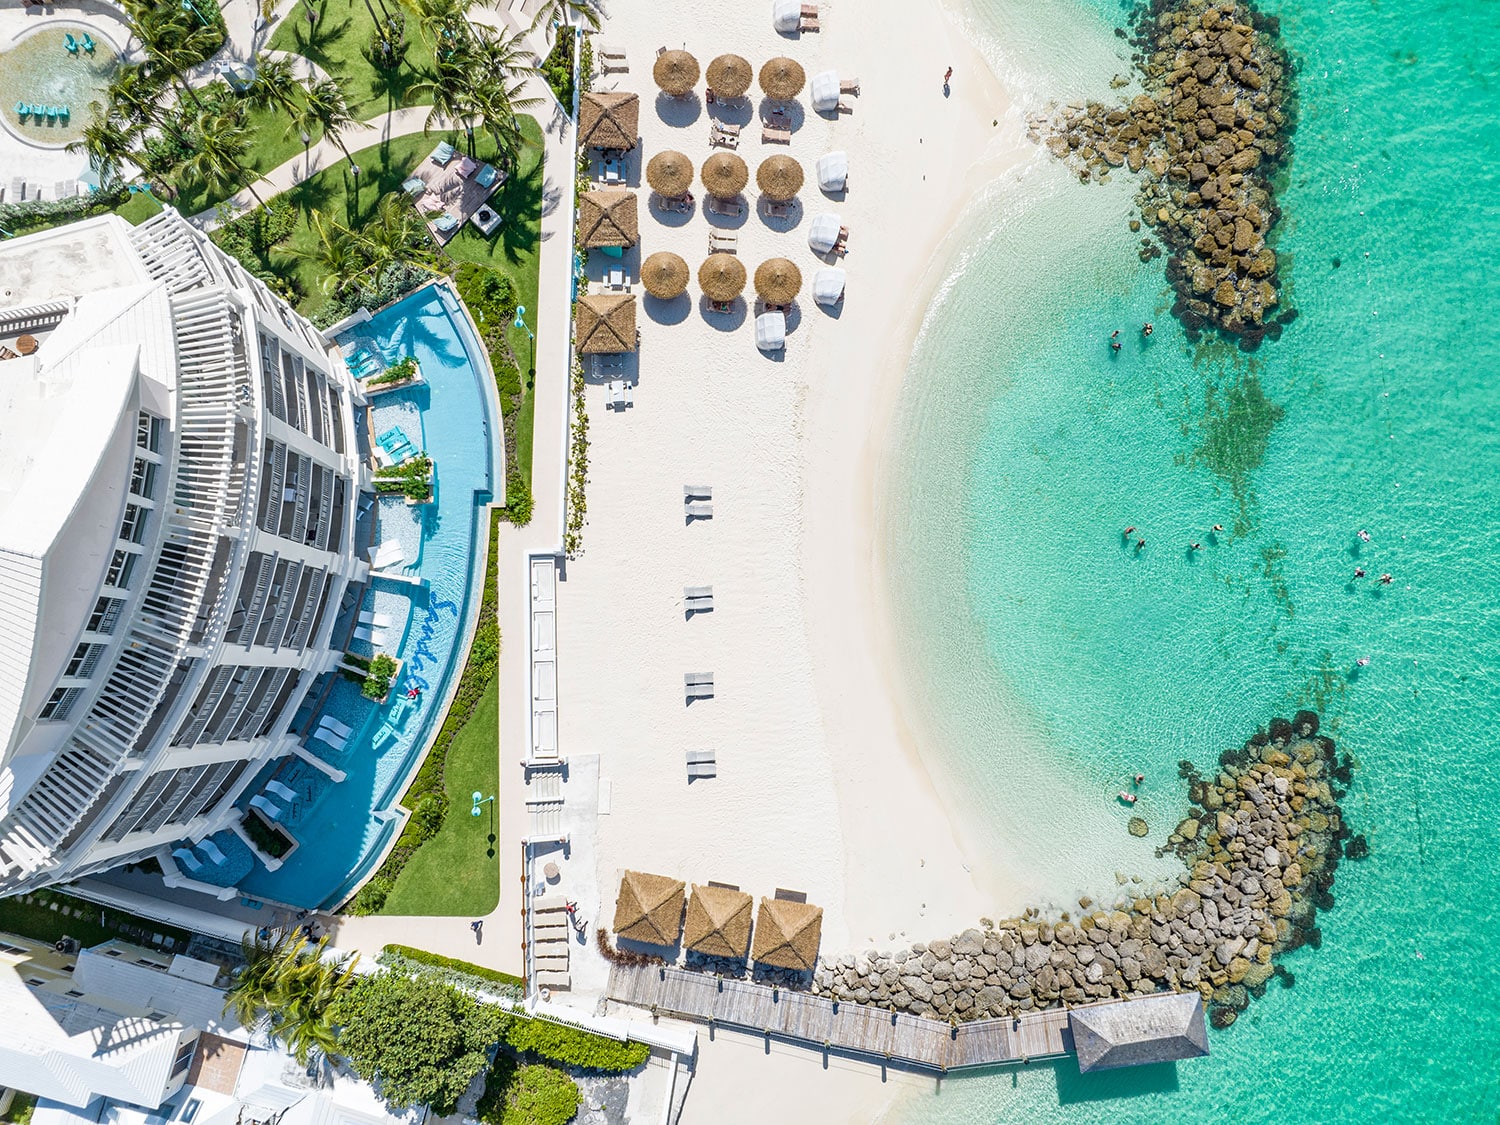 An aerial view of the beach and property at Sandals Royal Bahamian in Nassau, Bahamas.